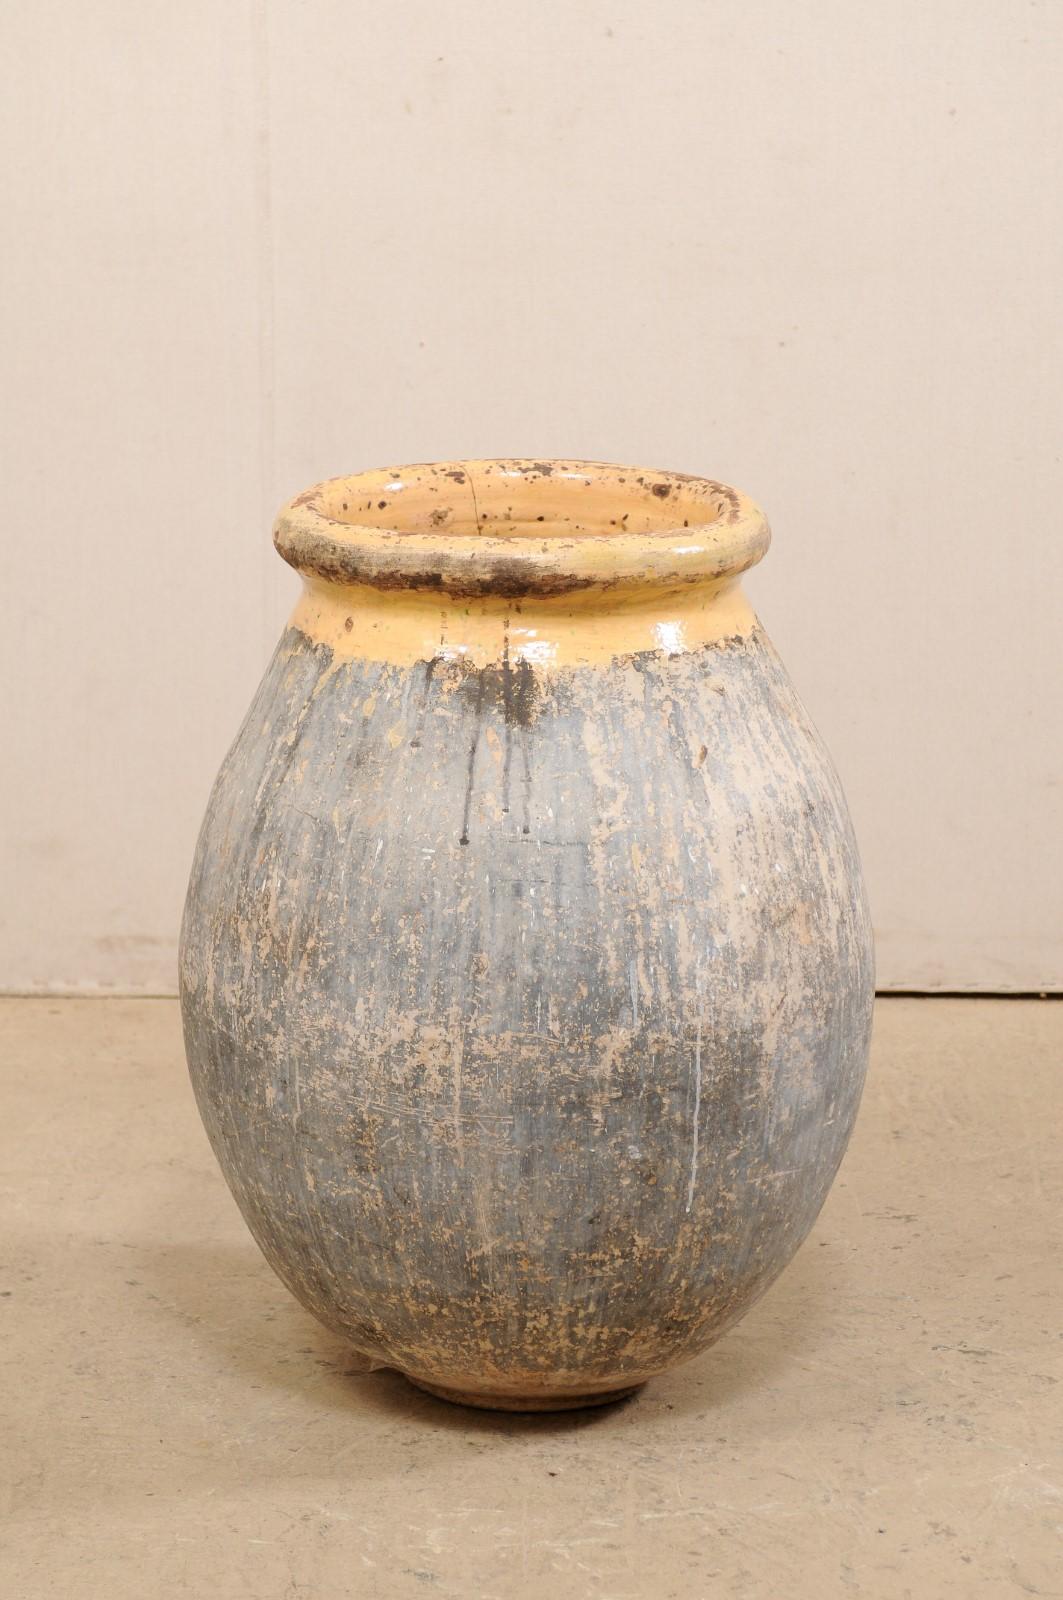 A French Biot jar from the early 20th century. This antique vessel from France features a mellon glazed and rolled rim & neck, with a wonderfully bulbous-shaped body. Biot is a small village in the south of France, famous for their clay pottery, and